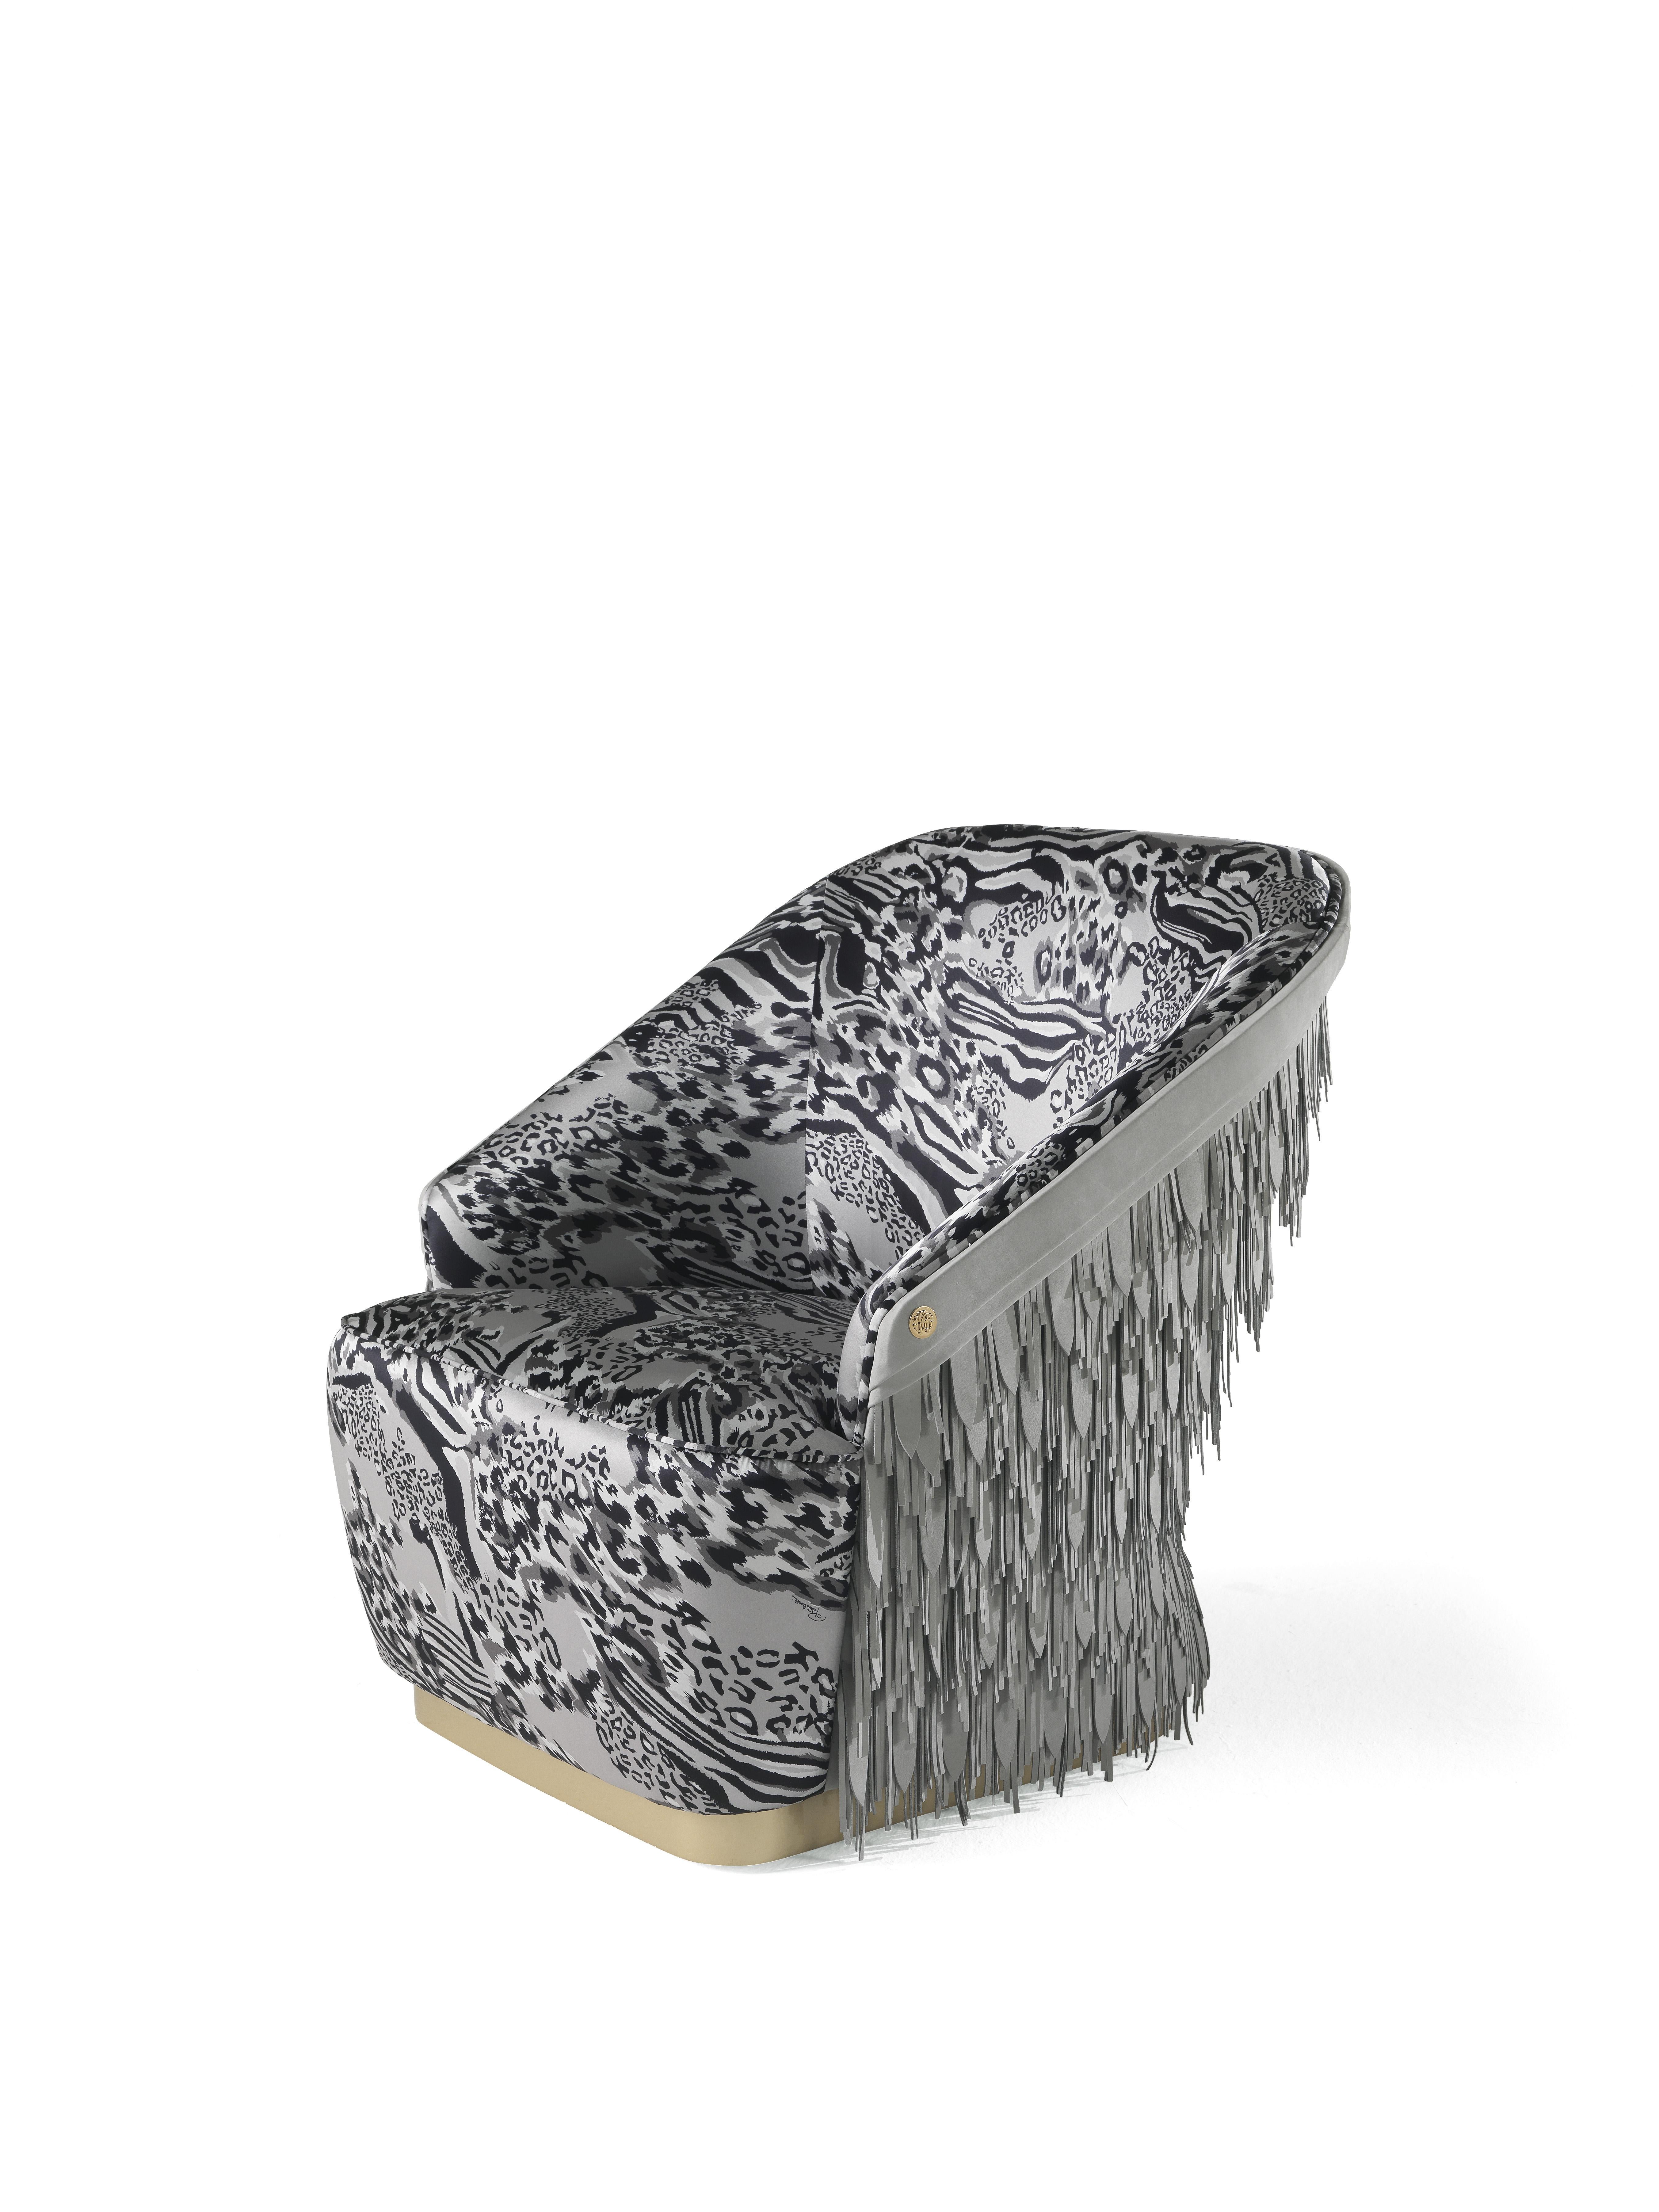 A new little armchair with an appealing design, characterized by a seat upholstered with the new silk Karen from the last Roberto Cavalli collection and by a particular and scenographic backrest made of leather fringes.
Dudley Armchair with